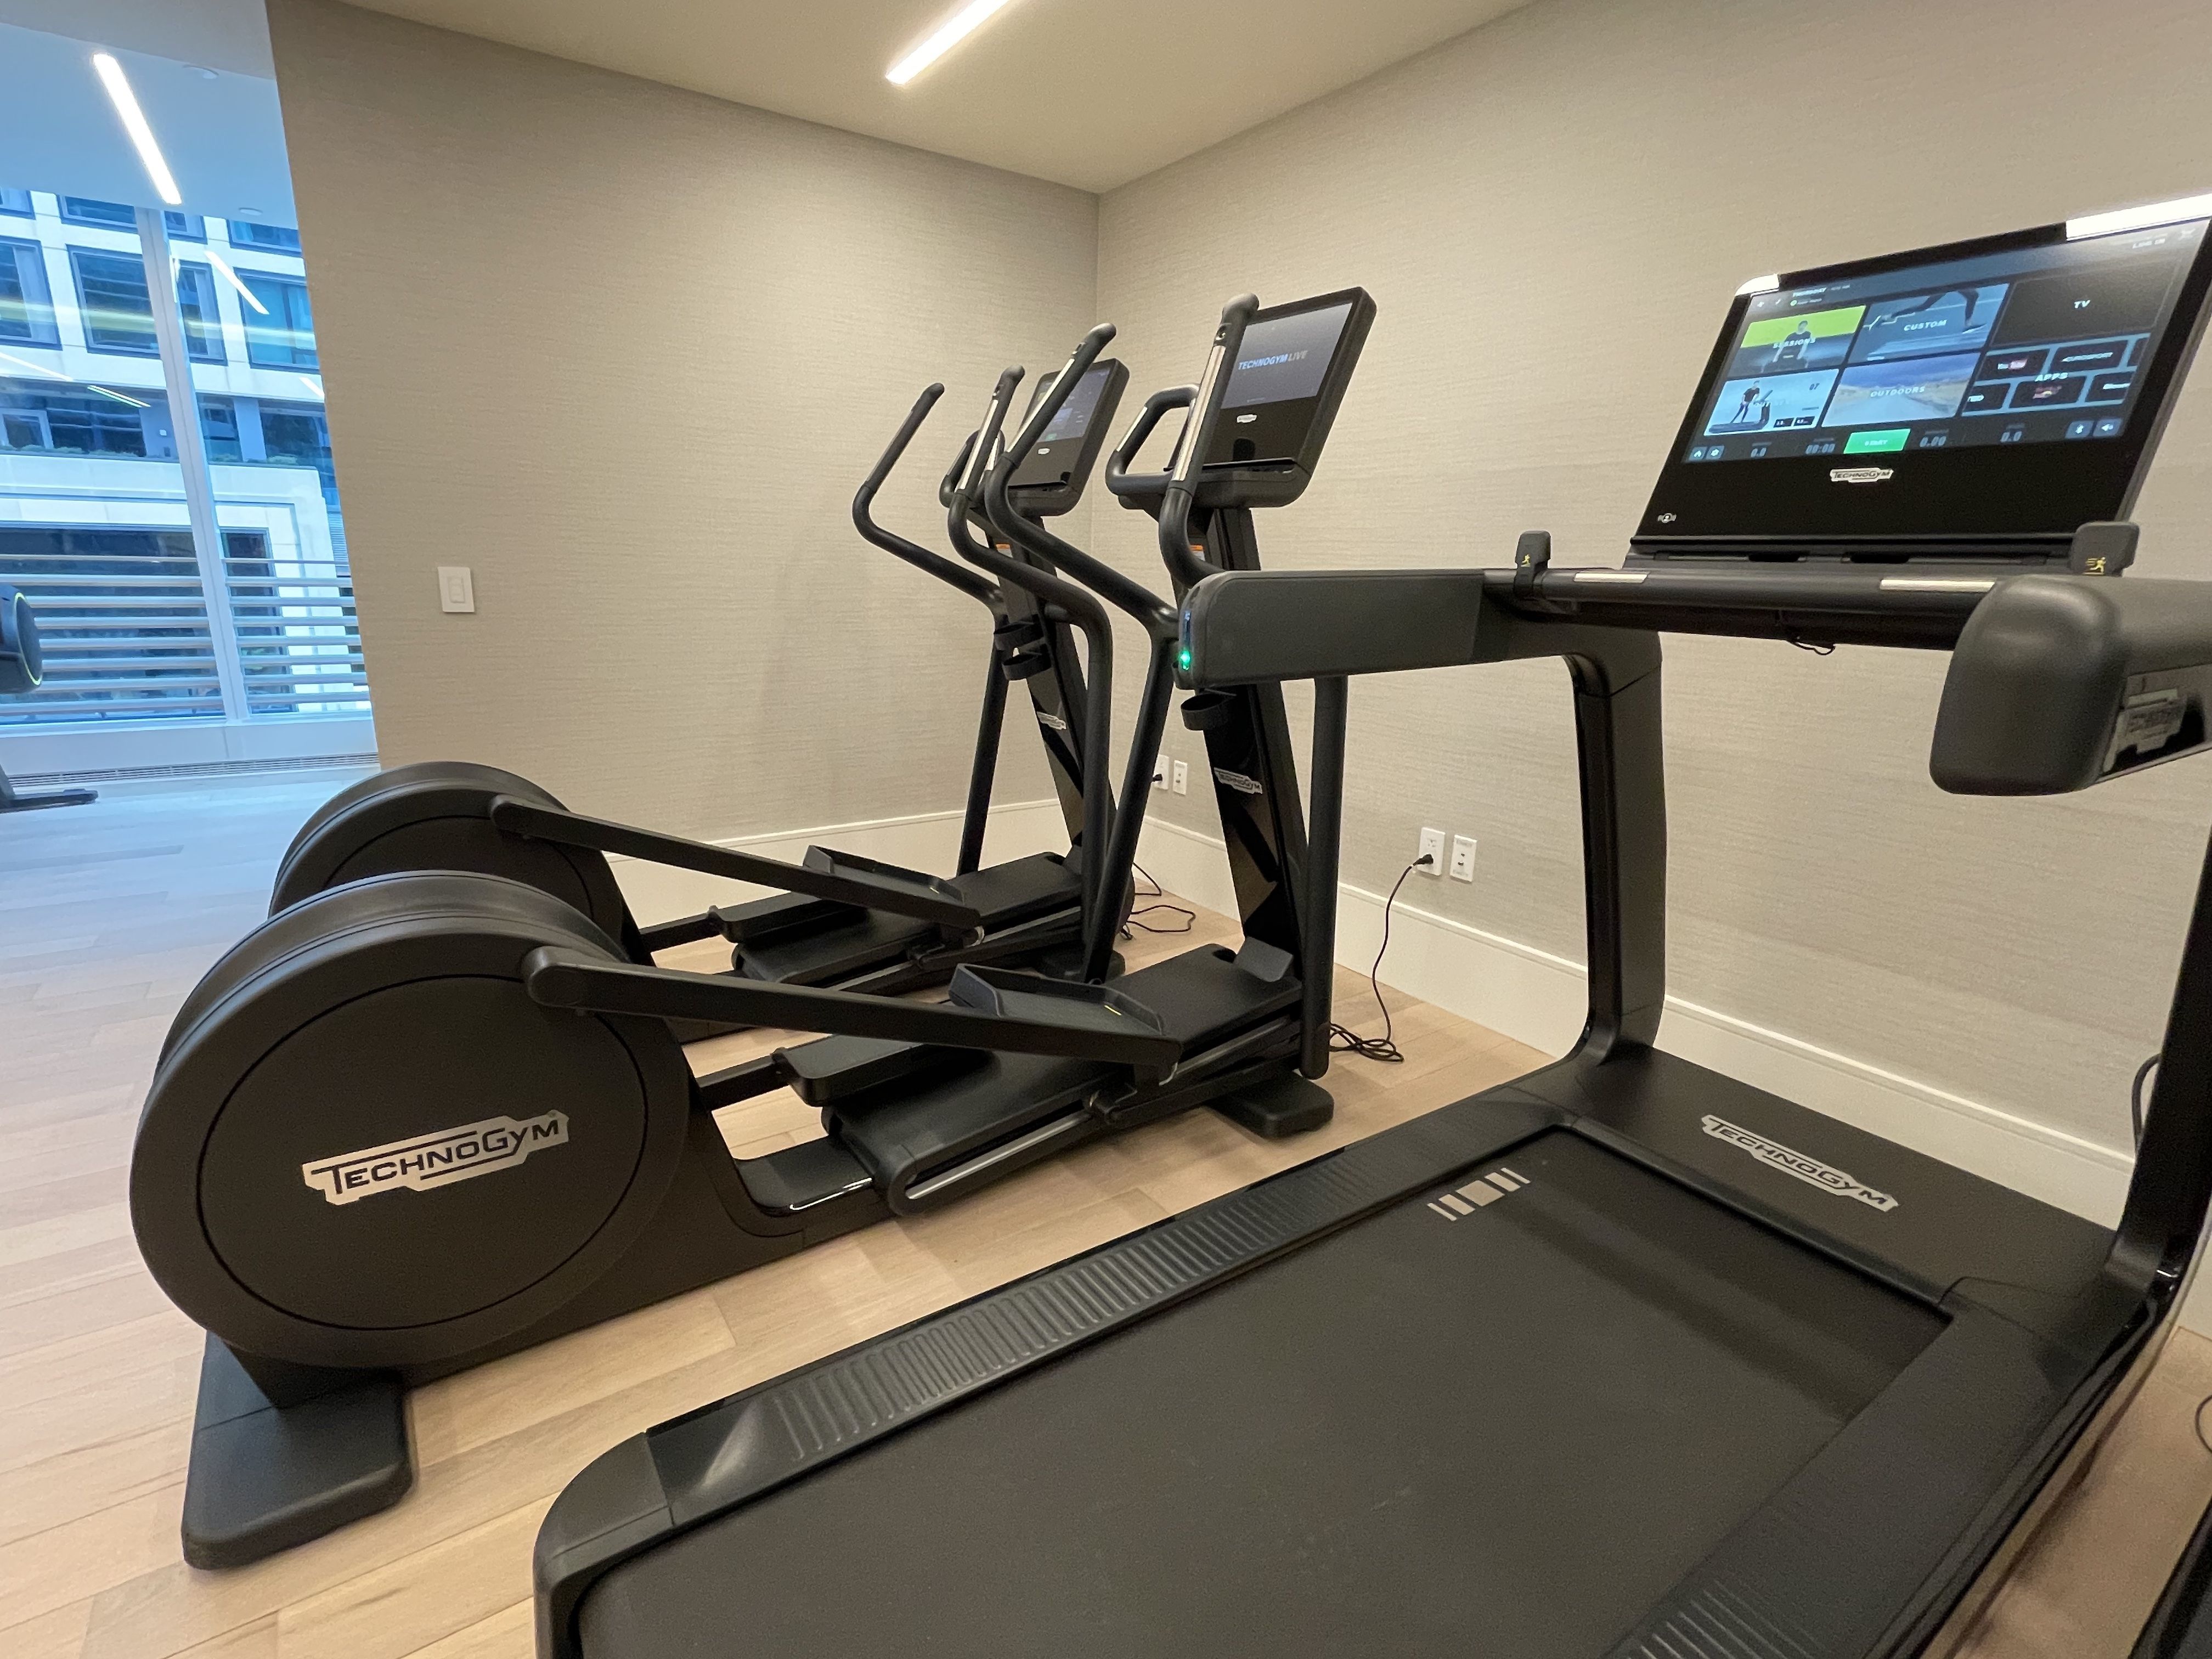 Technogym ellipticals and treadmills in the St. Regis fitness room on the fourth floor.